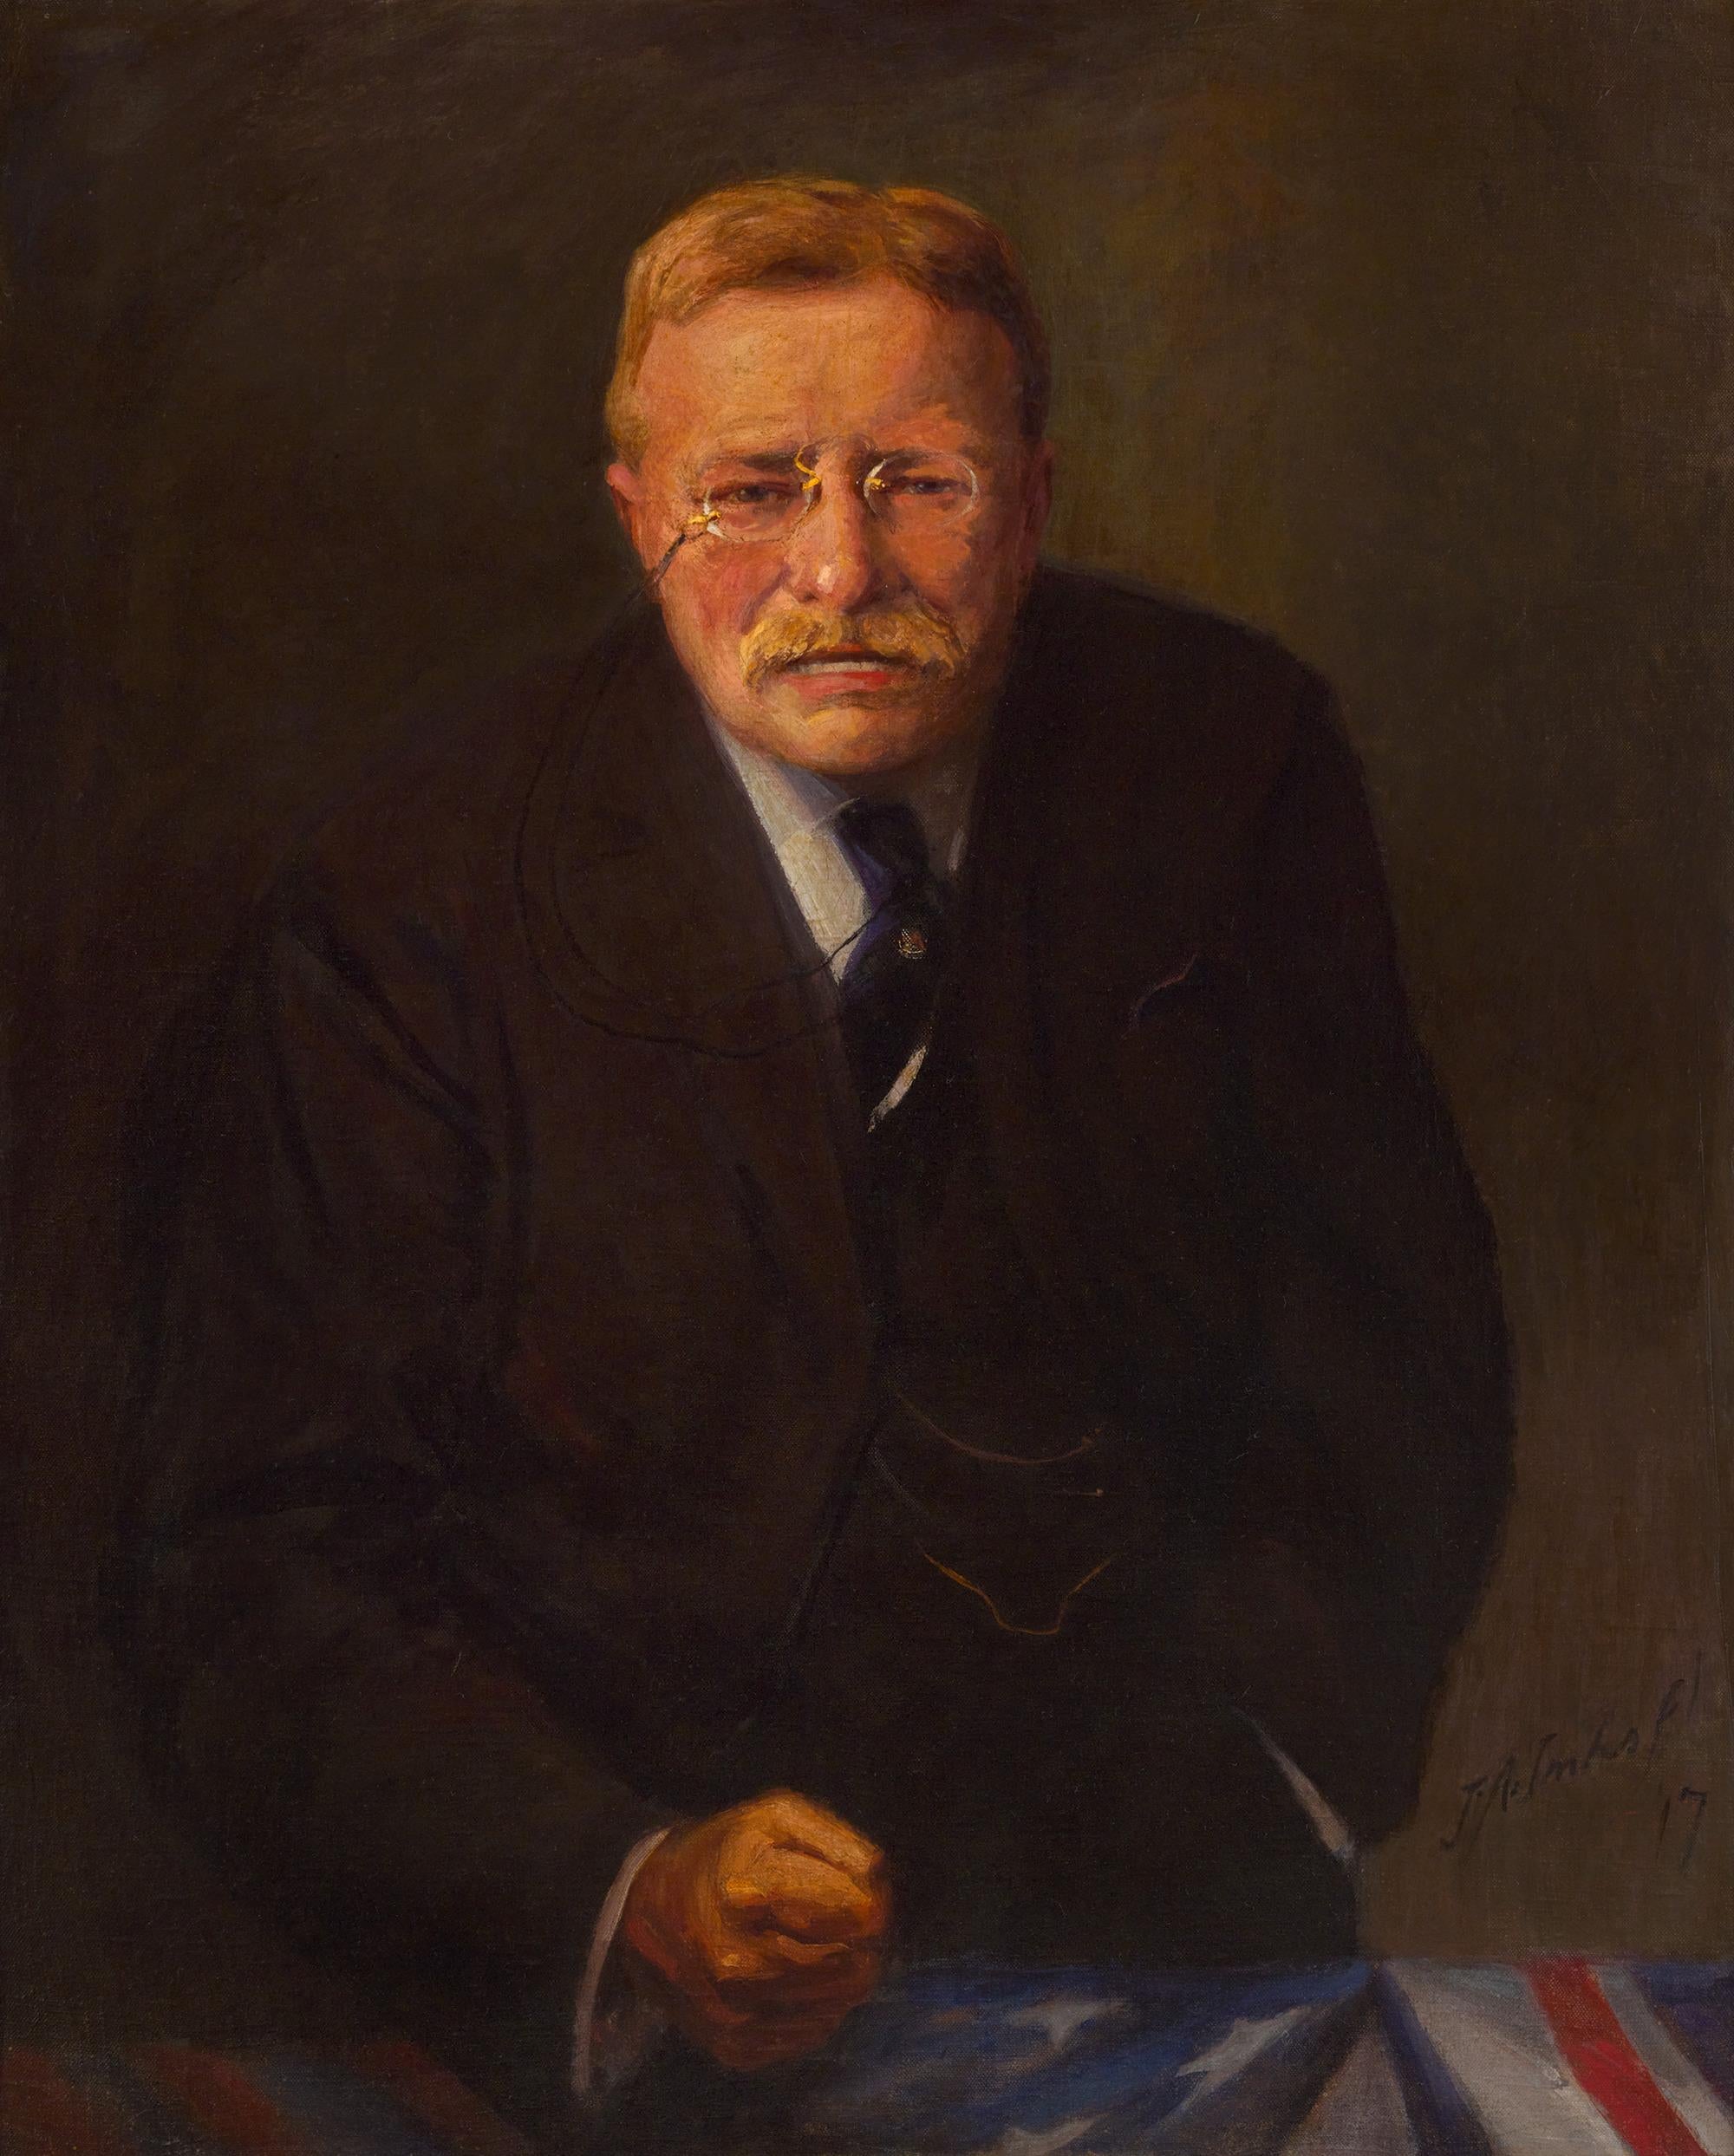 Portrait Of Theodore Roosevelt By Joseph A. Imhof